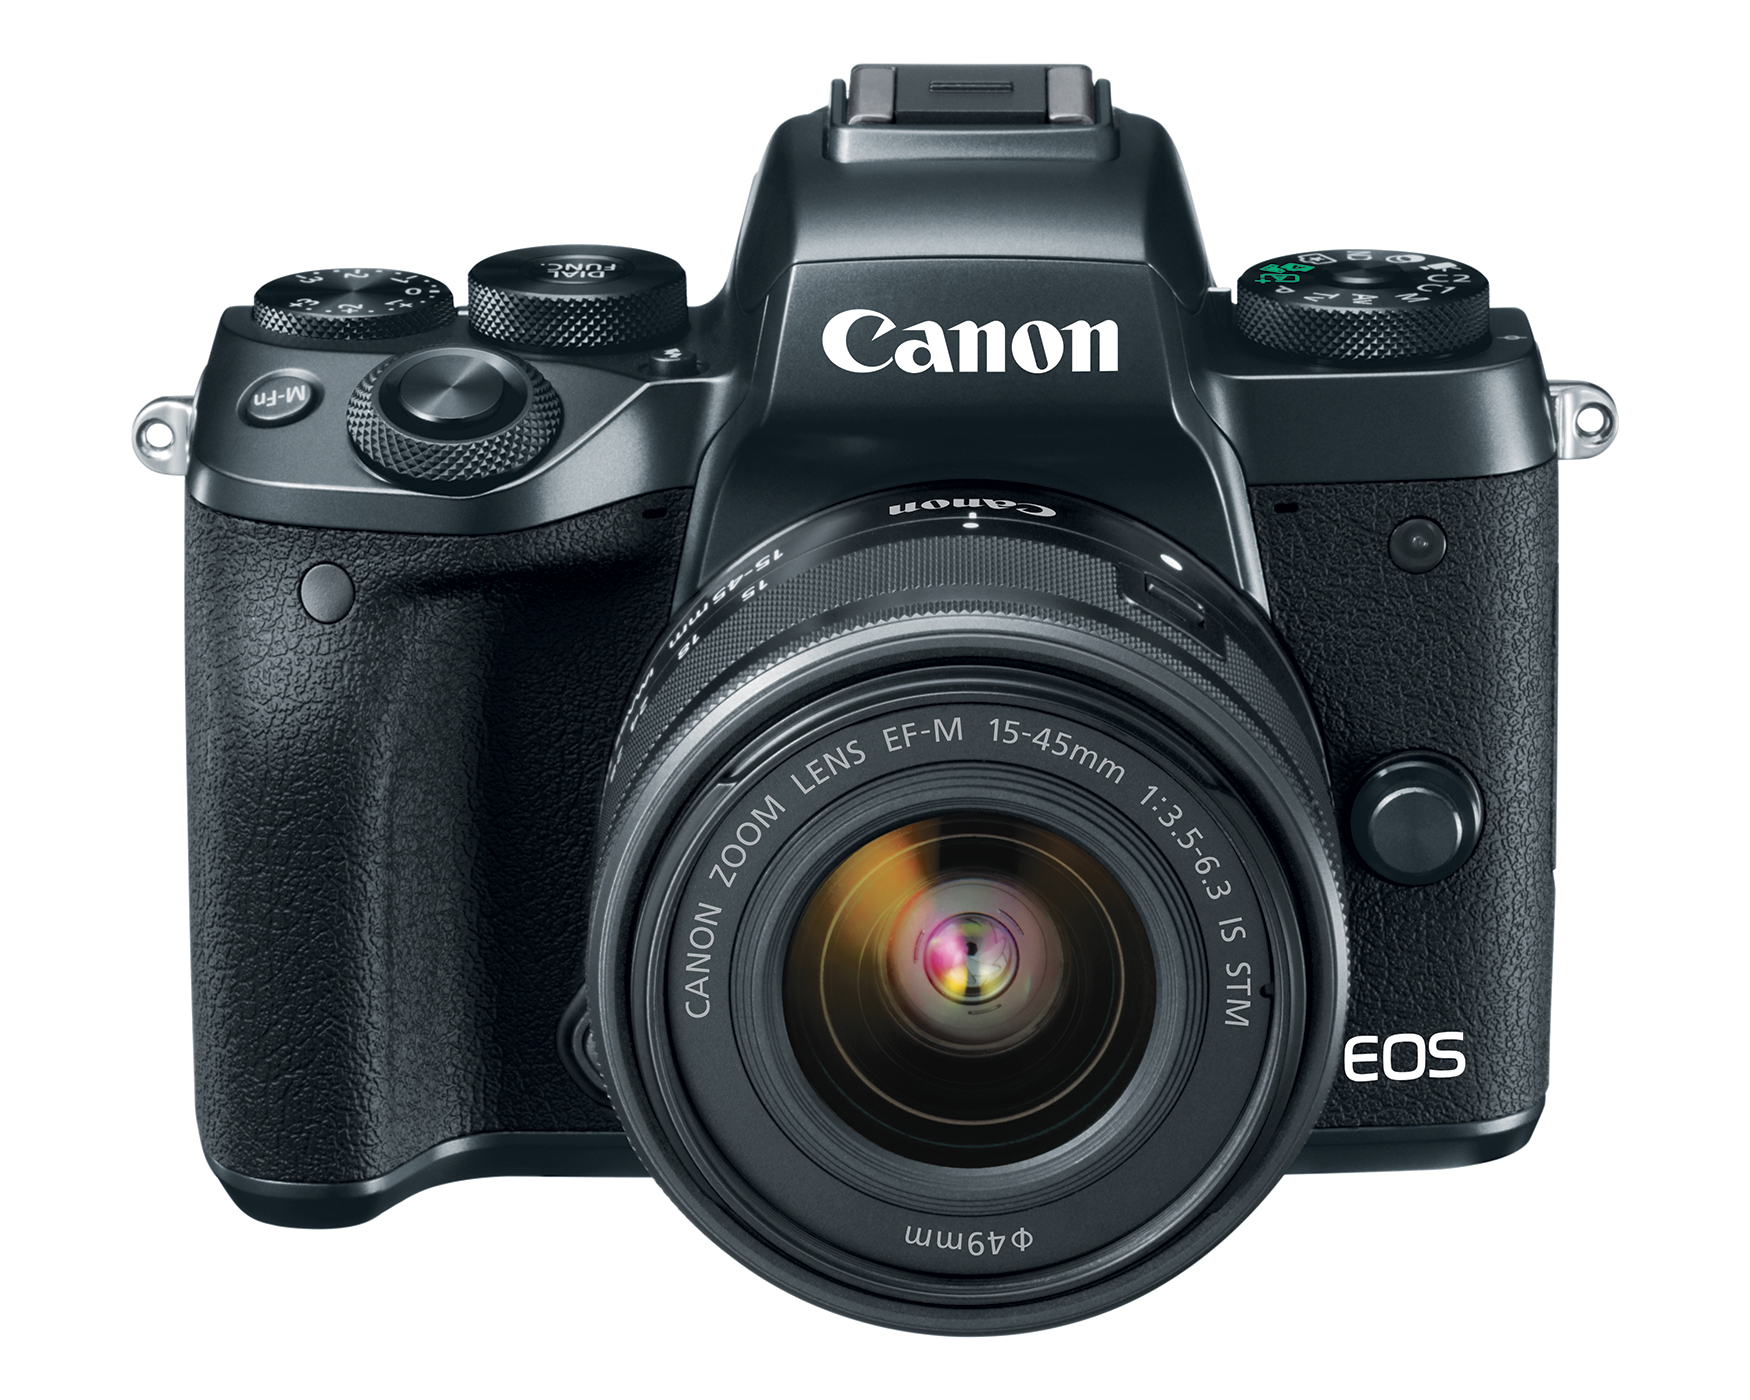 Canon Announces EOS M5 Flagship Mirrorless Camera And EF-M 18-150mm f/3.5-6.3 STM lens